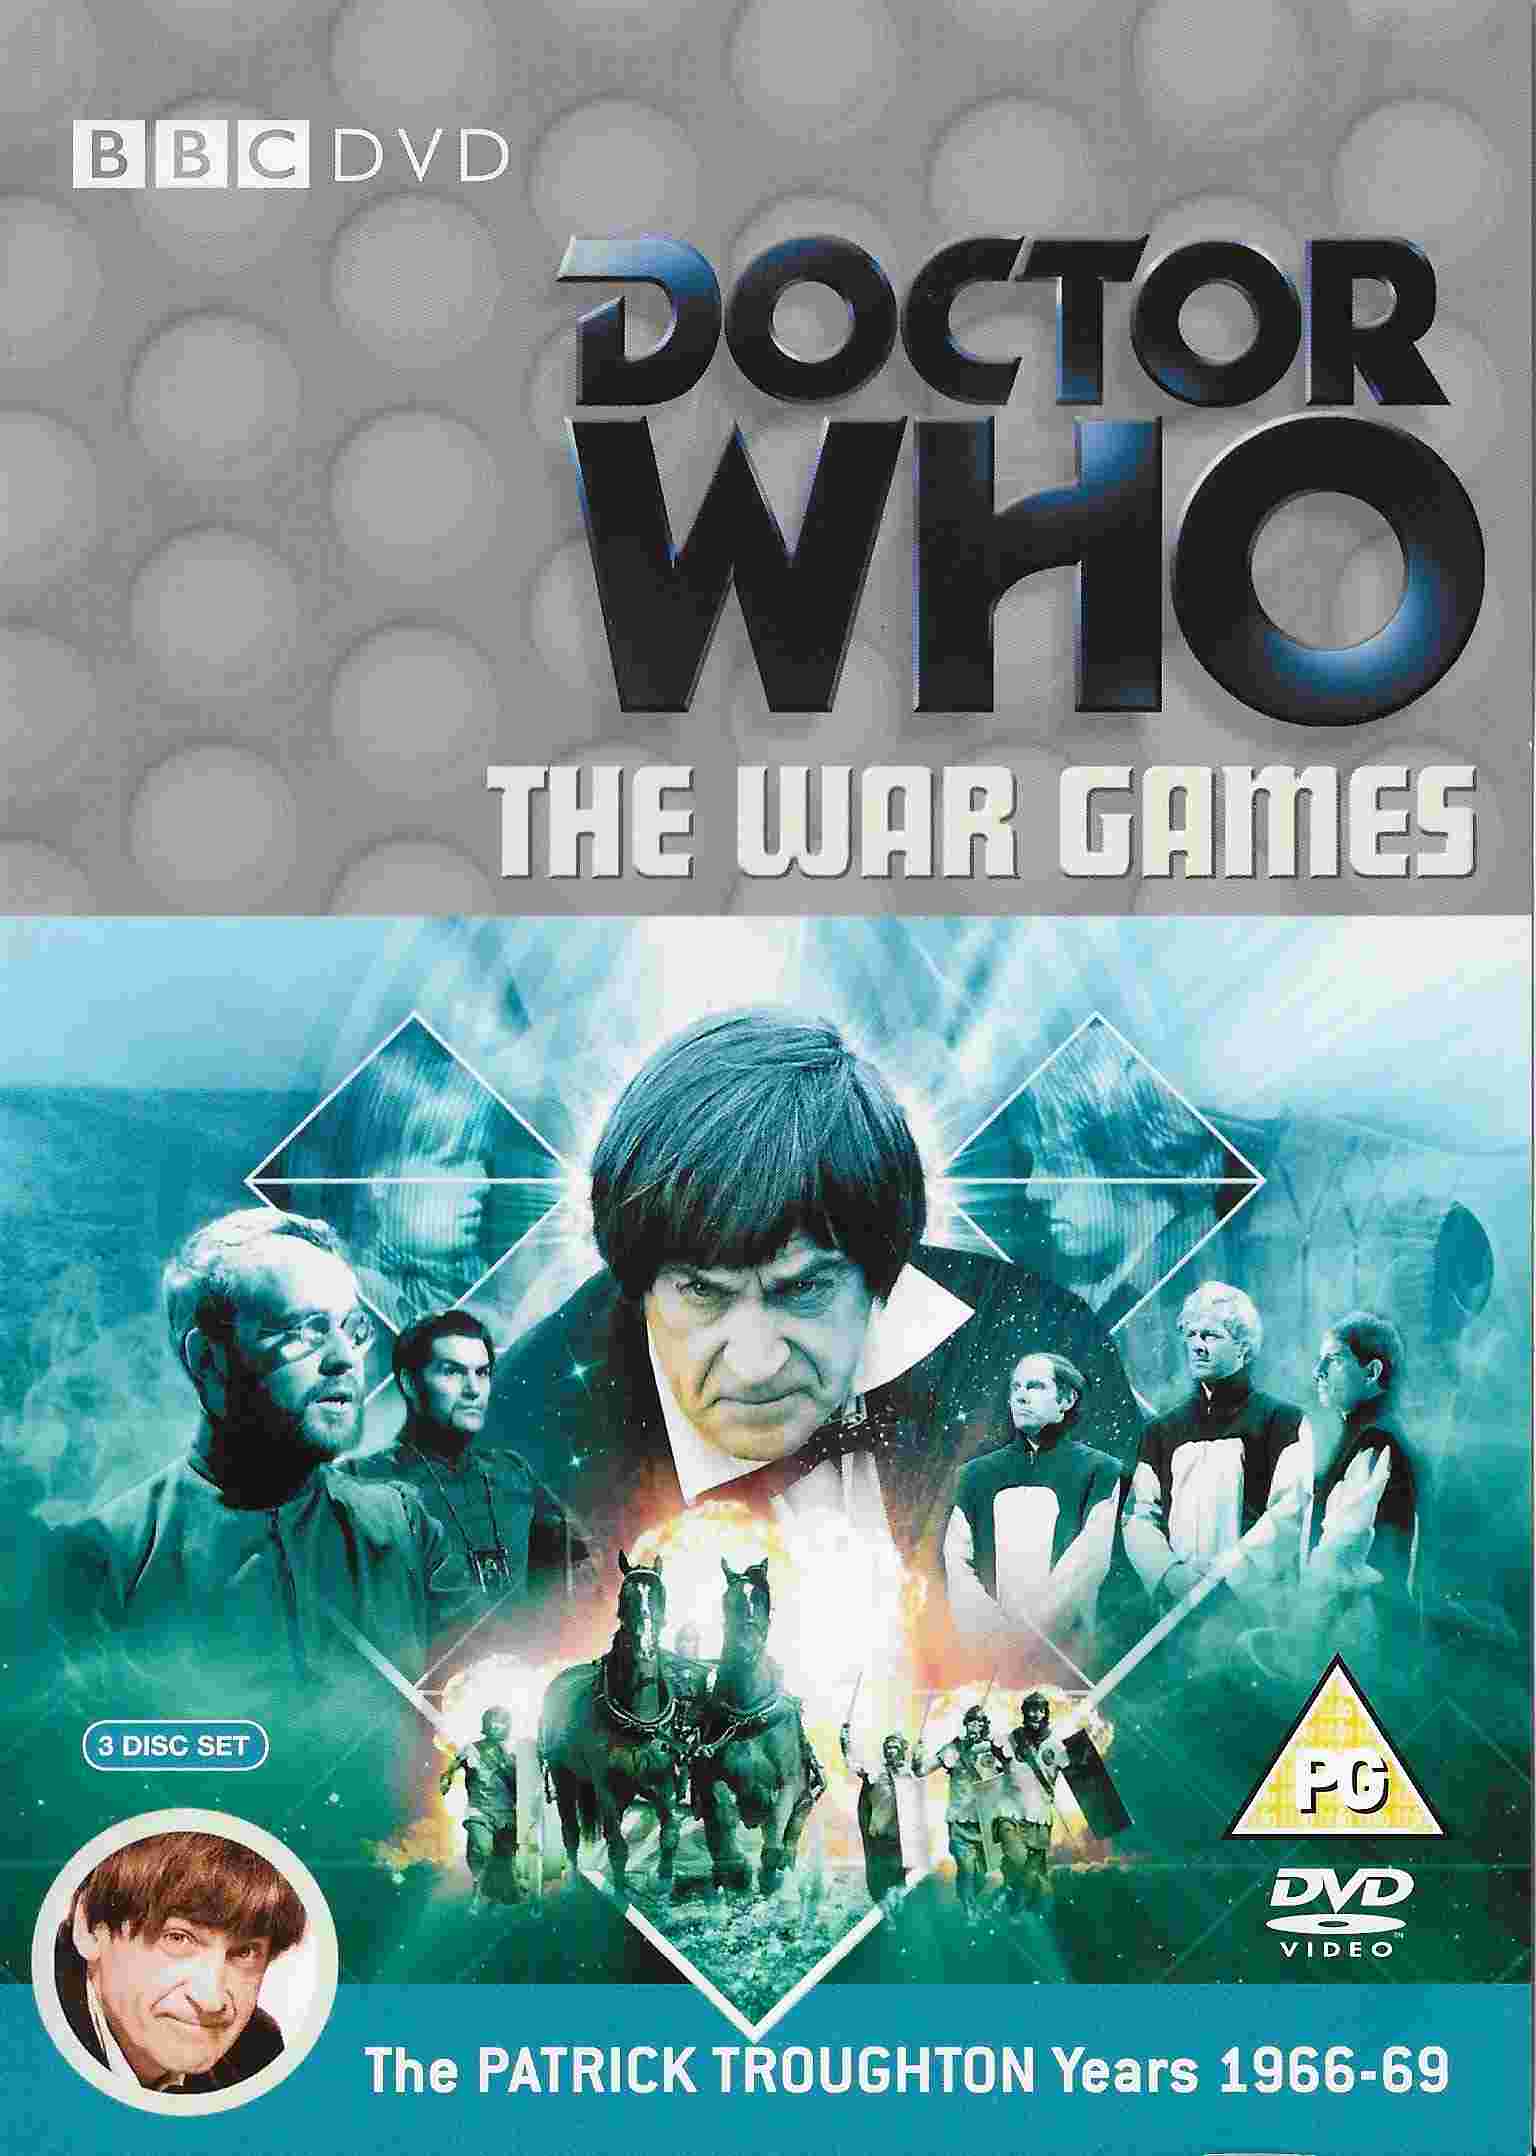 Picture of BBCDVD 1800 Doctor Who - The war games by artist Terrance Dicks / Malcolm Hulke from the BBC dvds - Records and Tapes library